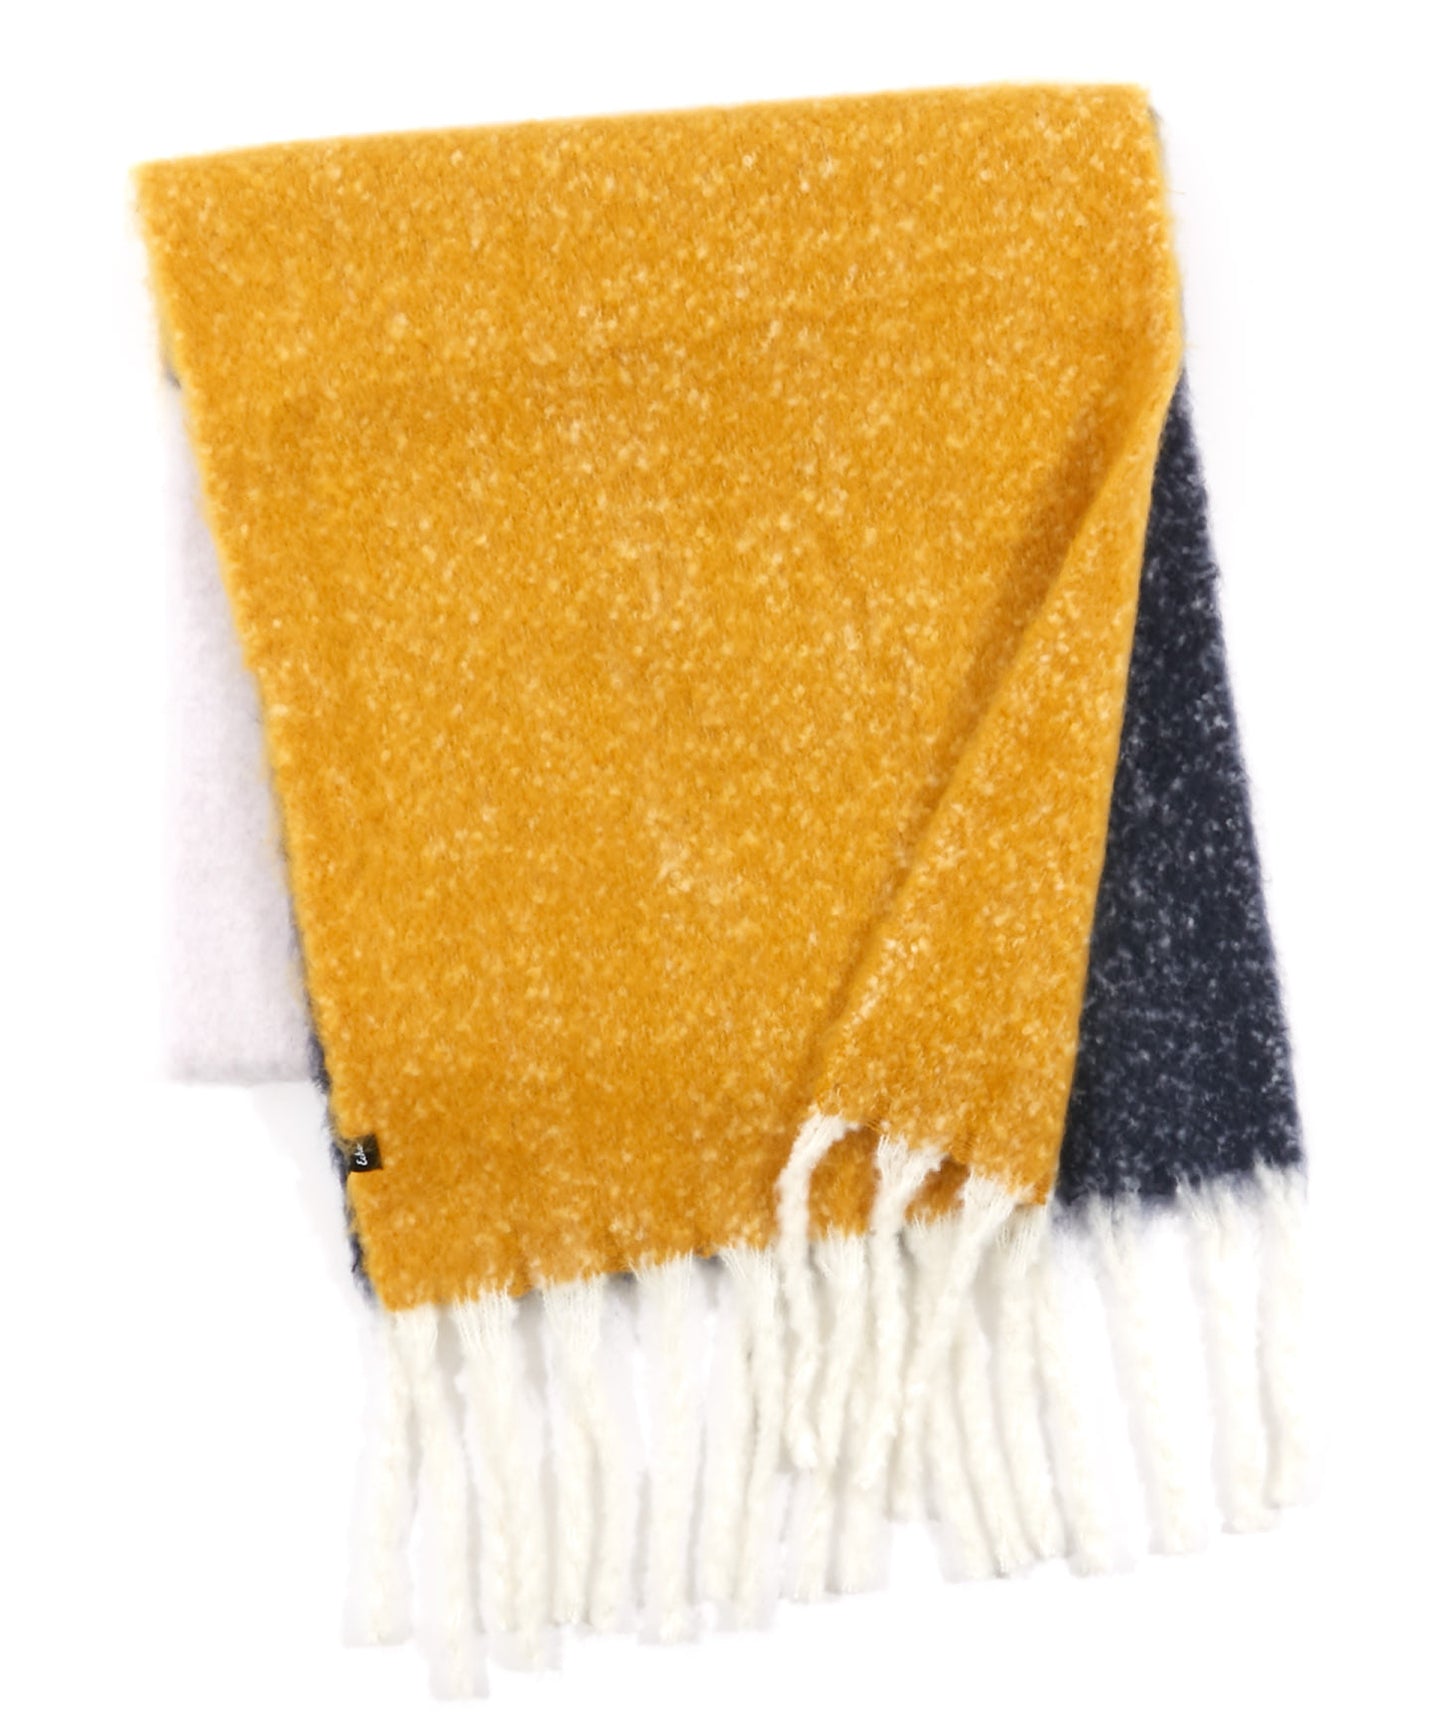 Brushed Blocked Scarf in color Navy